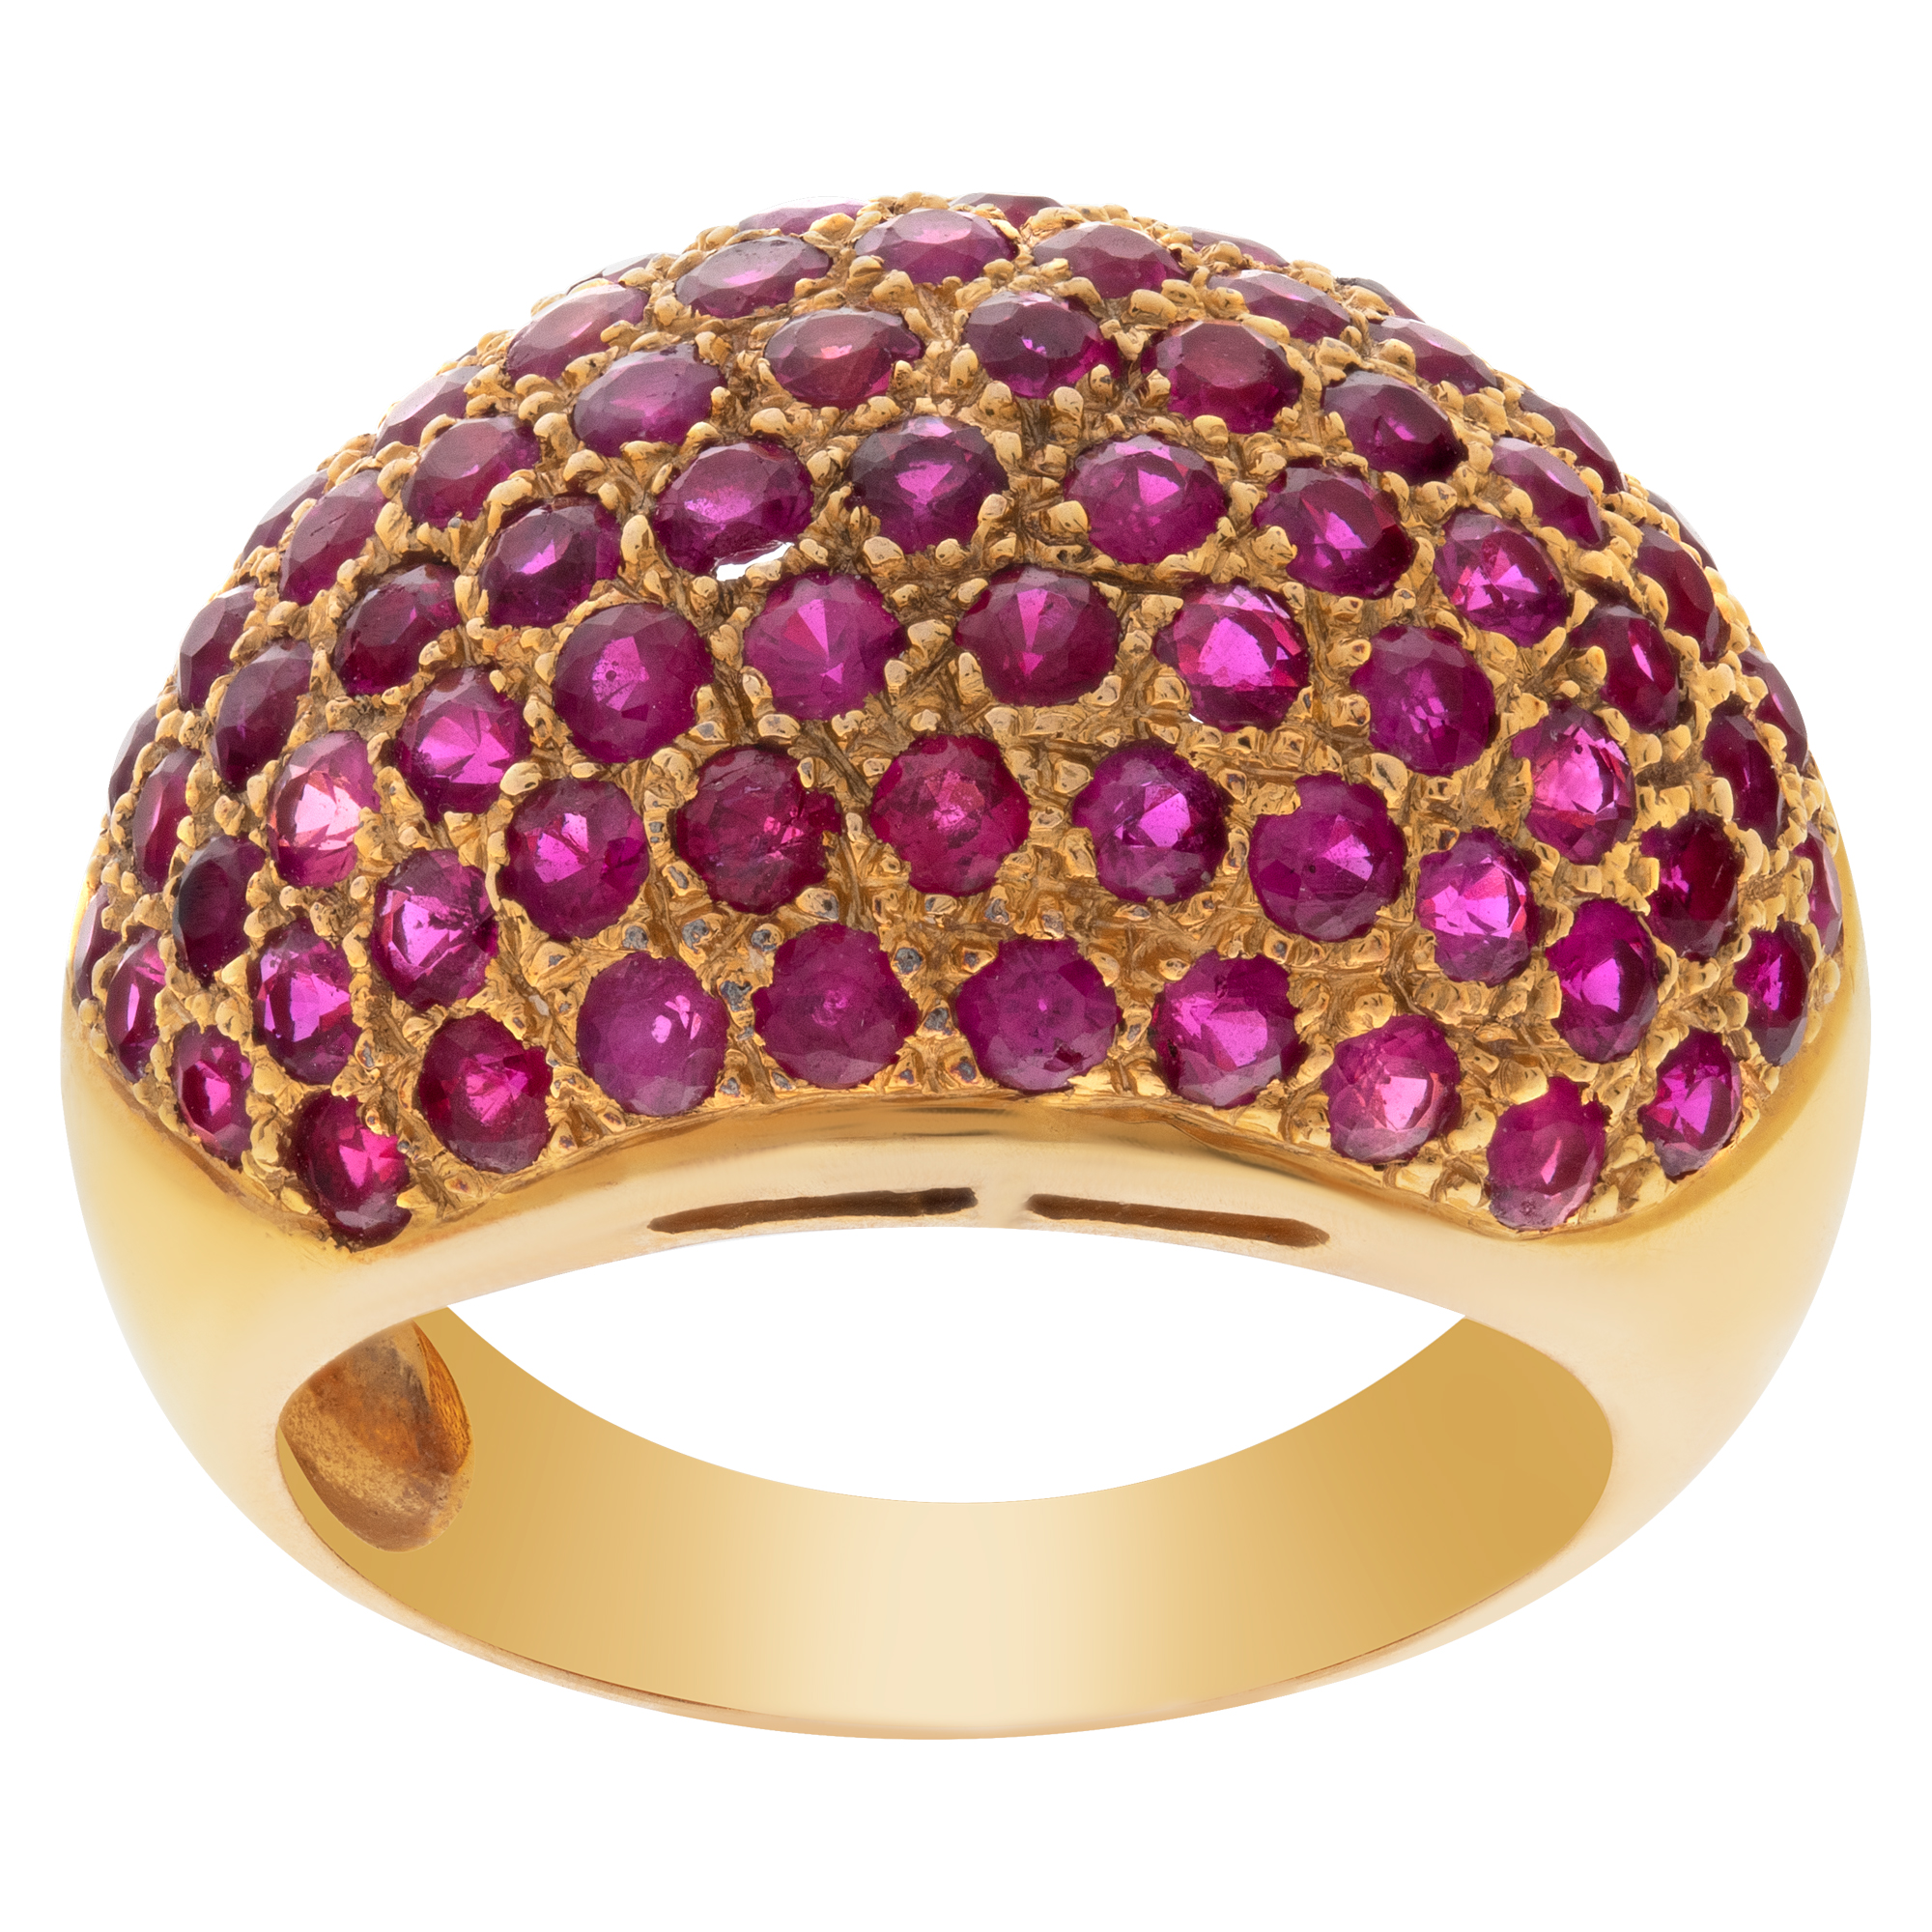 Round brilliant cut rubies set in 18K rose gold ring. Total rubies approximate weight: 3.0 carats. image 1